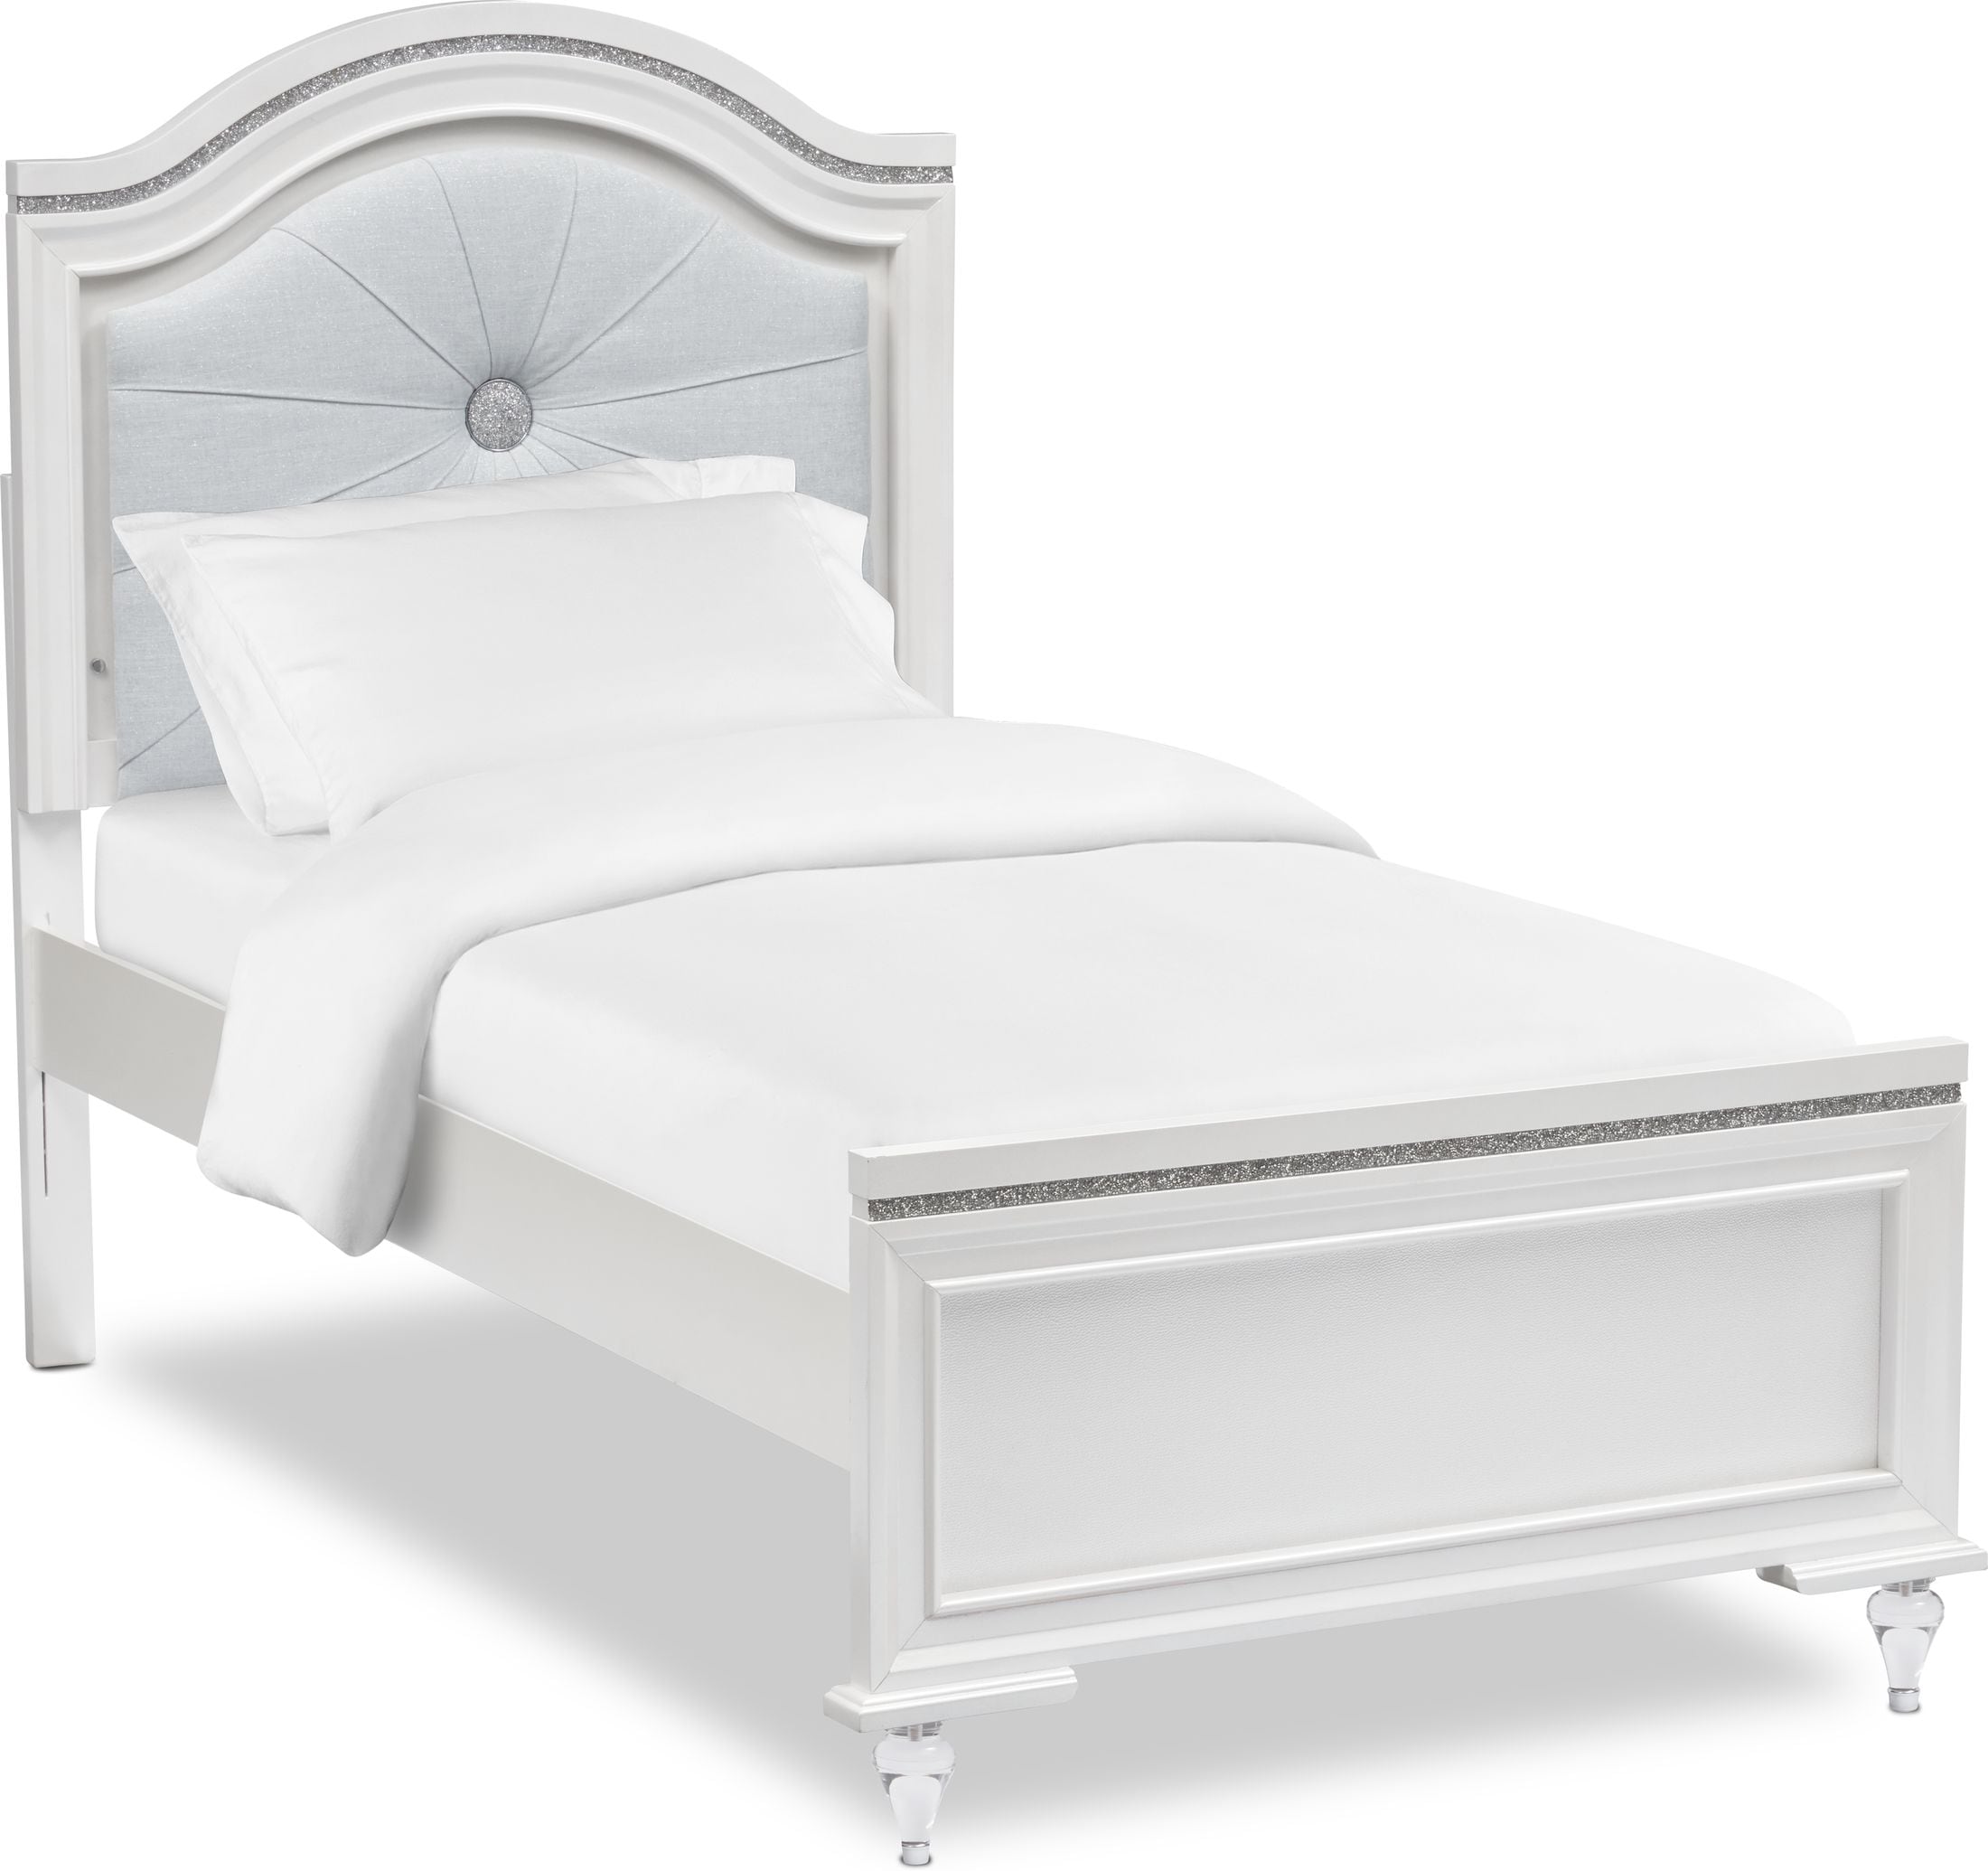 Value City Twin Beds Therugbycatalog Com, City Furniture Twin Beds